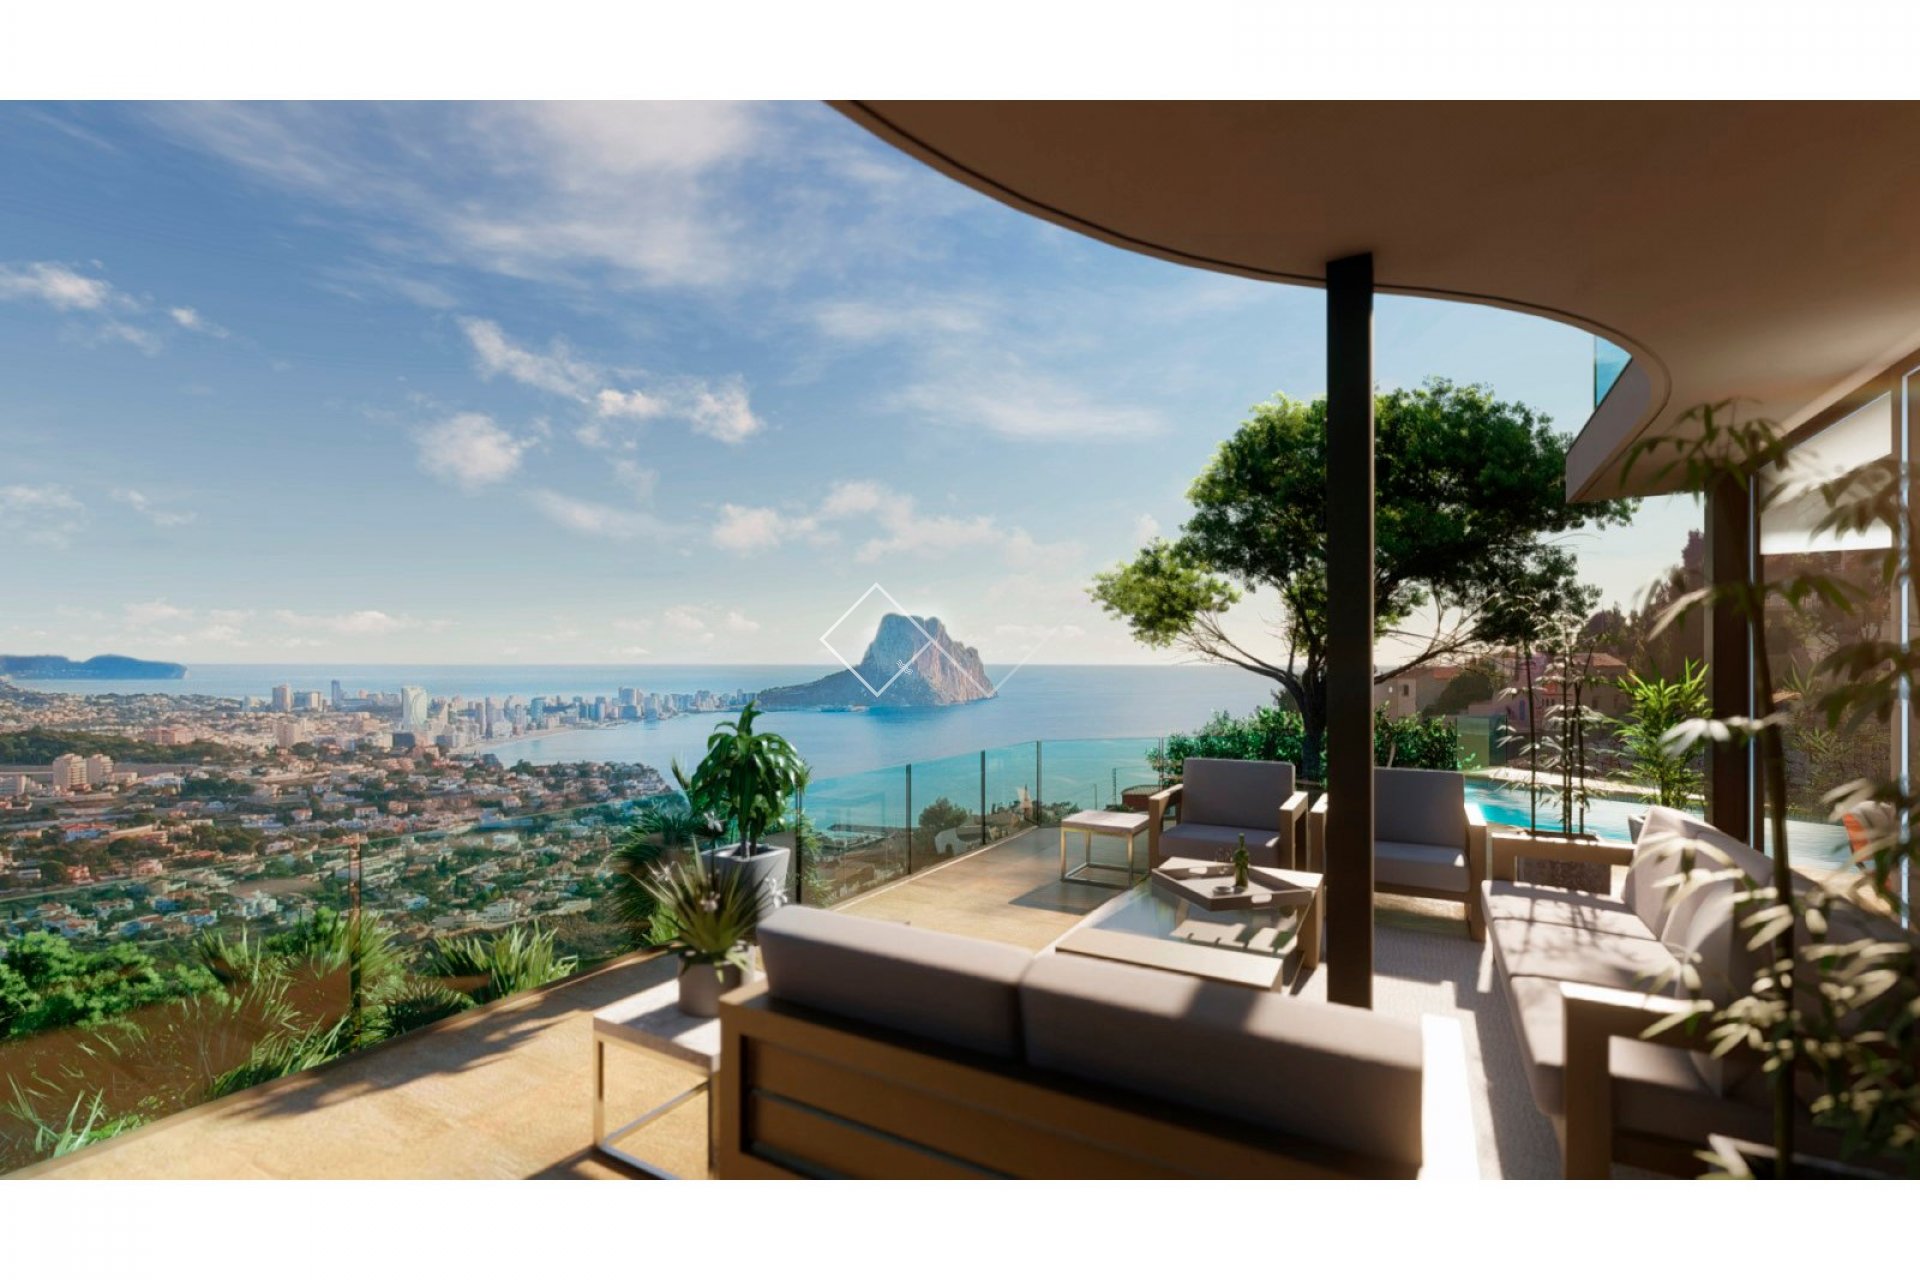 Calpe rock - Luxurious modern villa with 2 pools in Maryvilla, Calpe